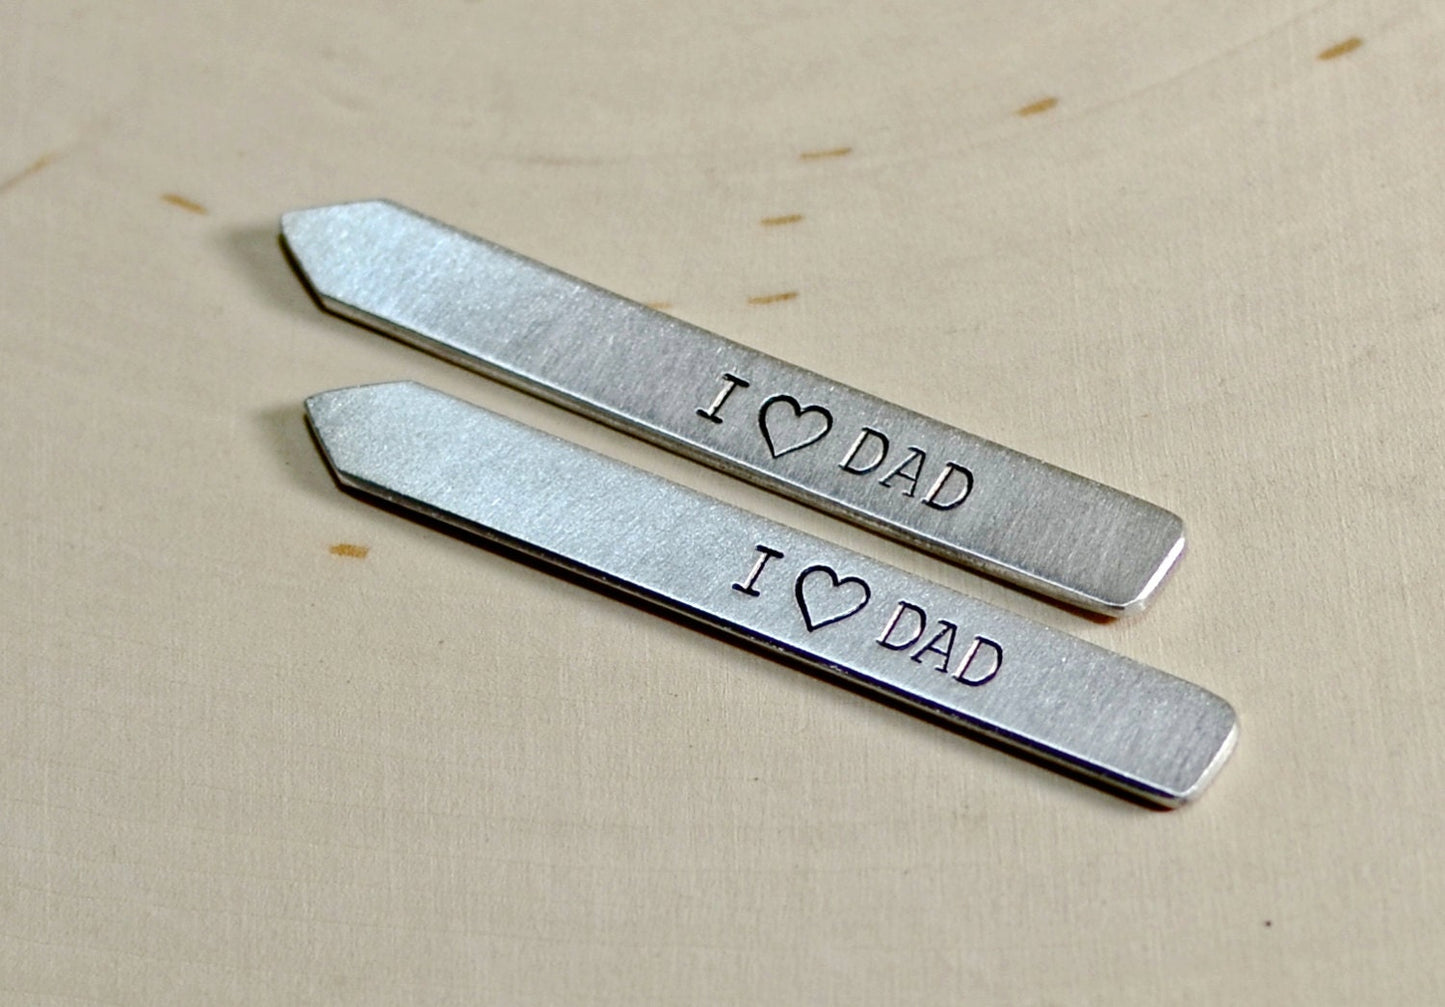 I love dad stamped on aluminum collar stays